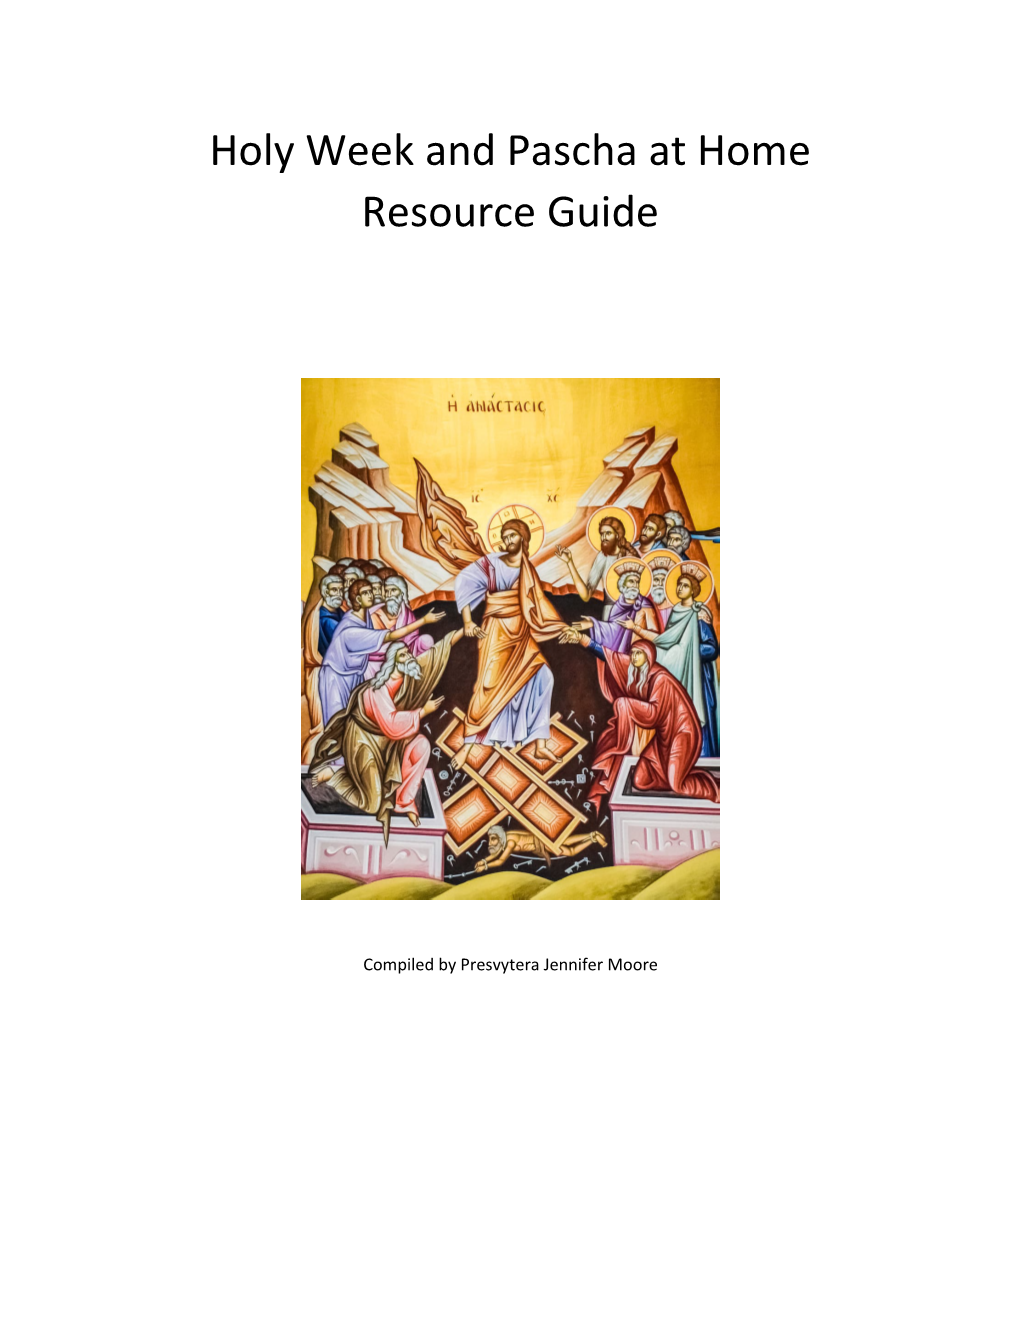 Holy Week and Pascha at Home Resource Guide